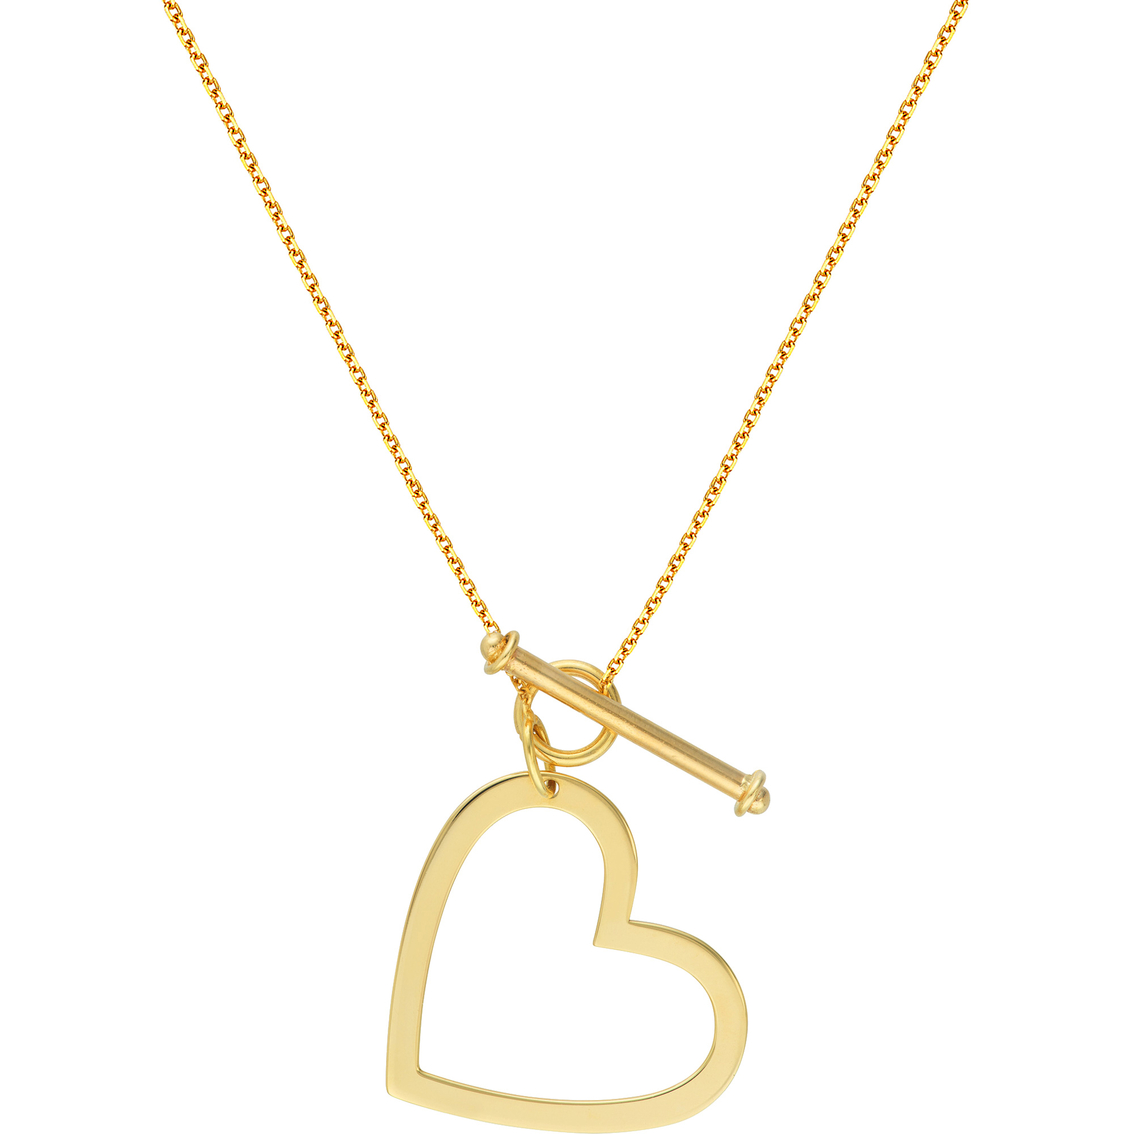 14k Yellow Gold Heart Toggle Necklace | Gold Necklaces & Pendants ...